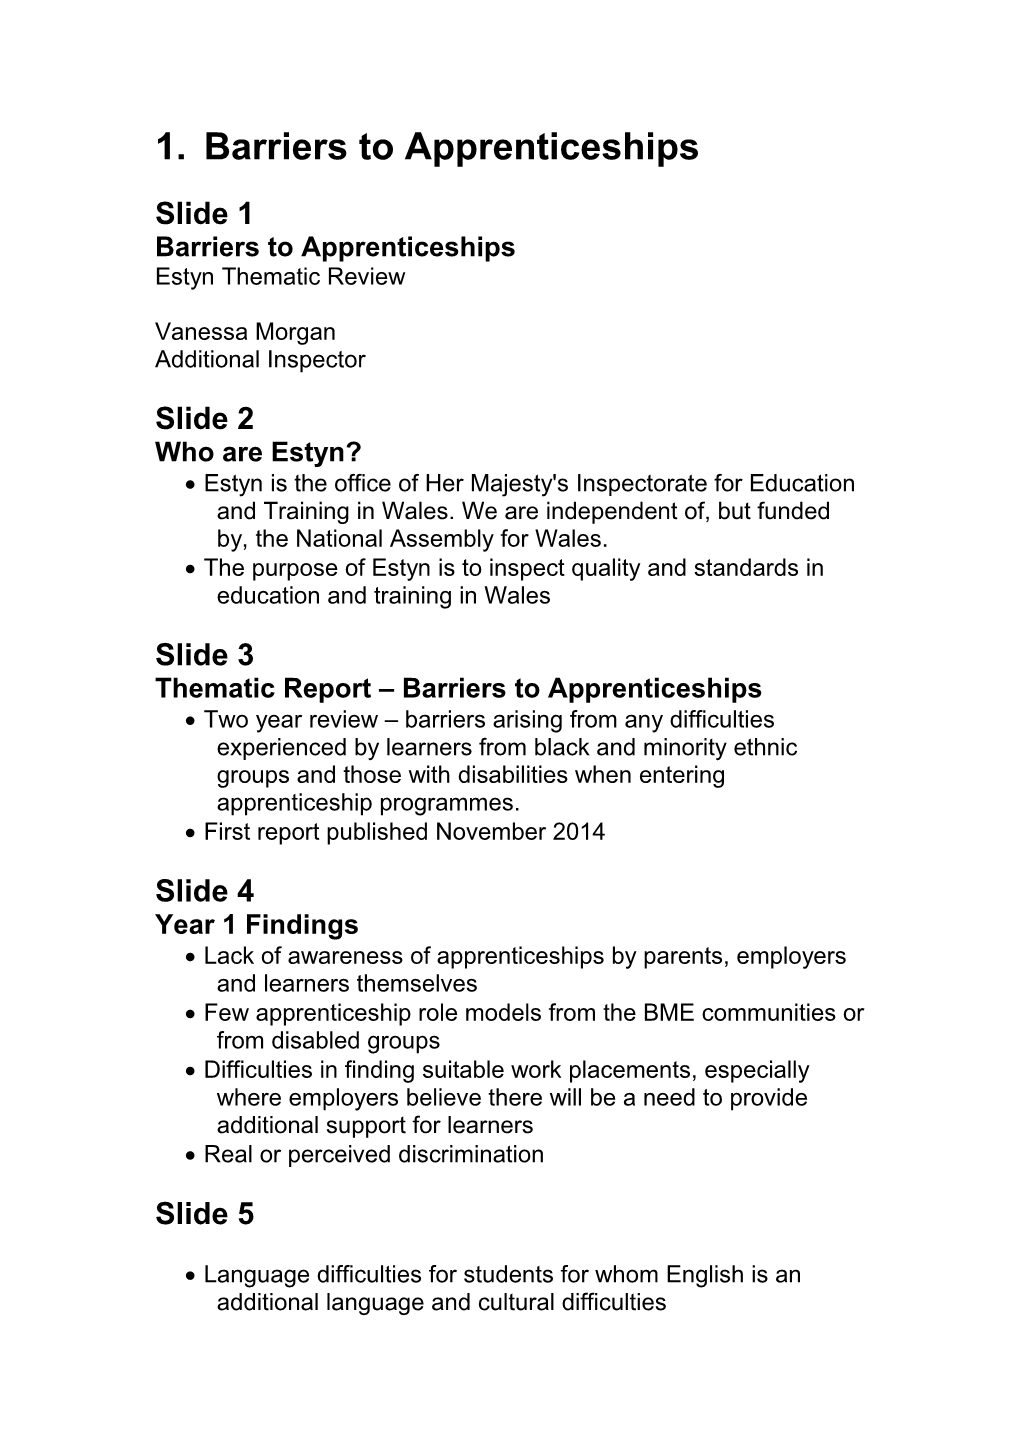 Barriers to Apprenticeships